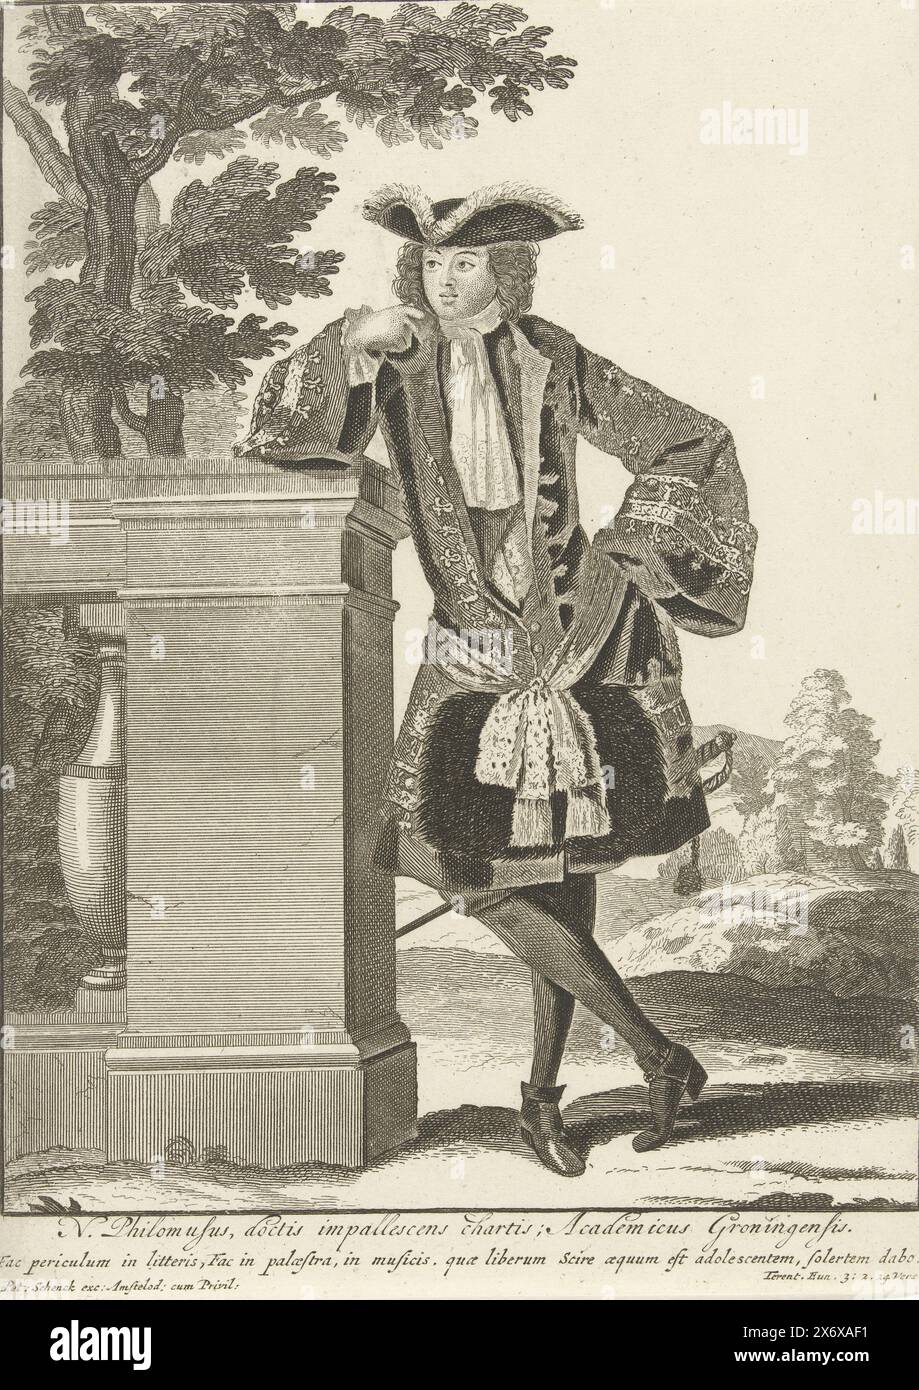 Groningen student, ca. 1700, N. Philomusus, doctis impallescens charitis, Academicus Groningensis (title on object), Student of the University of Groningen, standing full-length, leaning against a balustrade. He is dressed according to the French fashion of his time., print, print maker: Pieter Schenk (I), (attributed to), publisher: Pieter Schenk (I), (mentioned on object), unknown, Amsterdam, 1690 - 1700, paper, etching, engraving, height, 255 mm × width, 183 mm Stock Photo